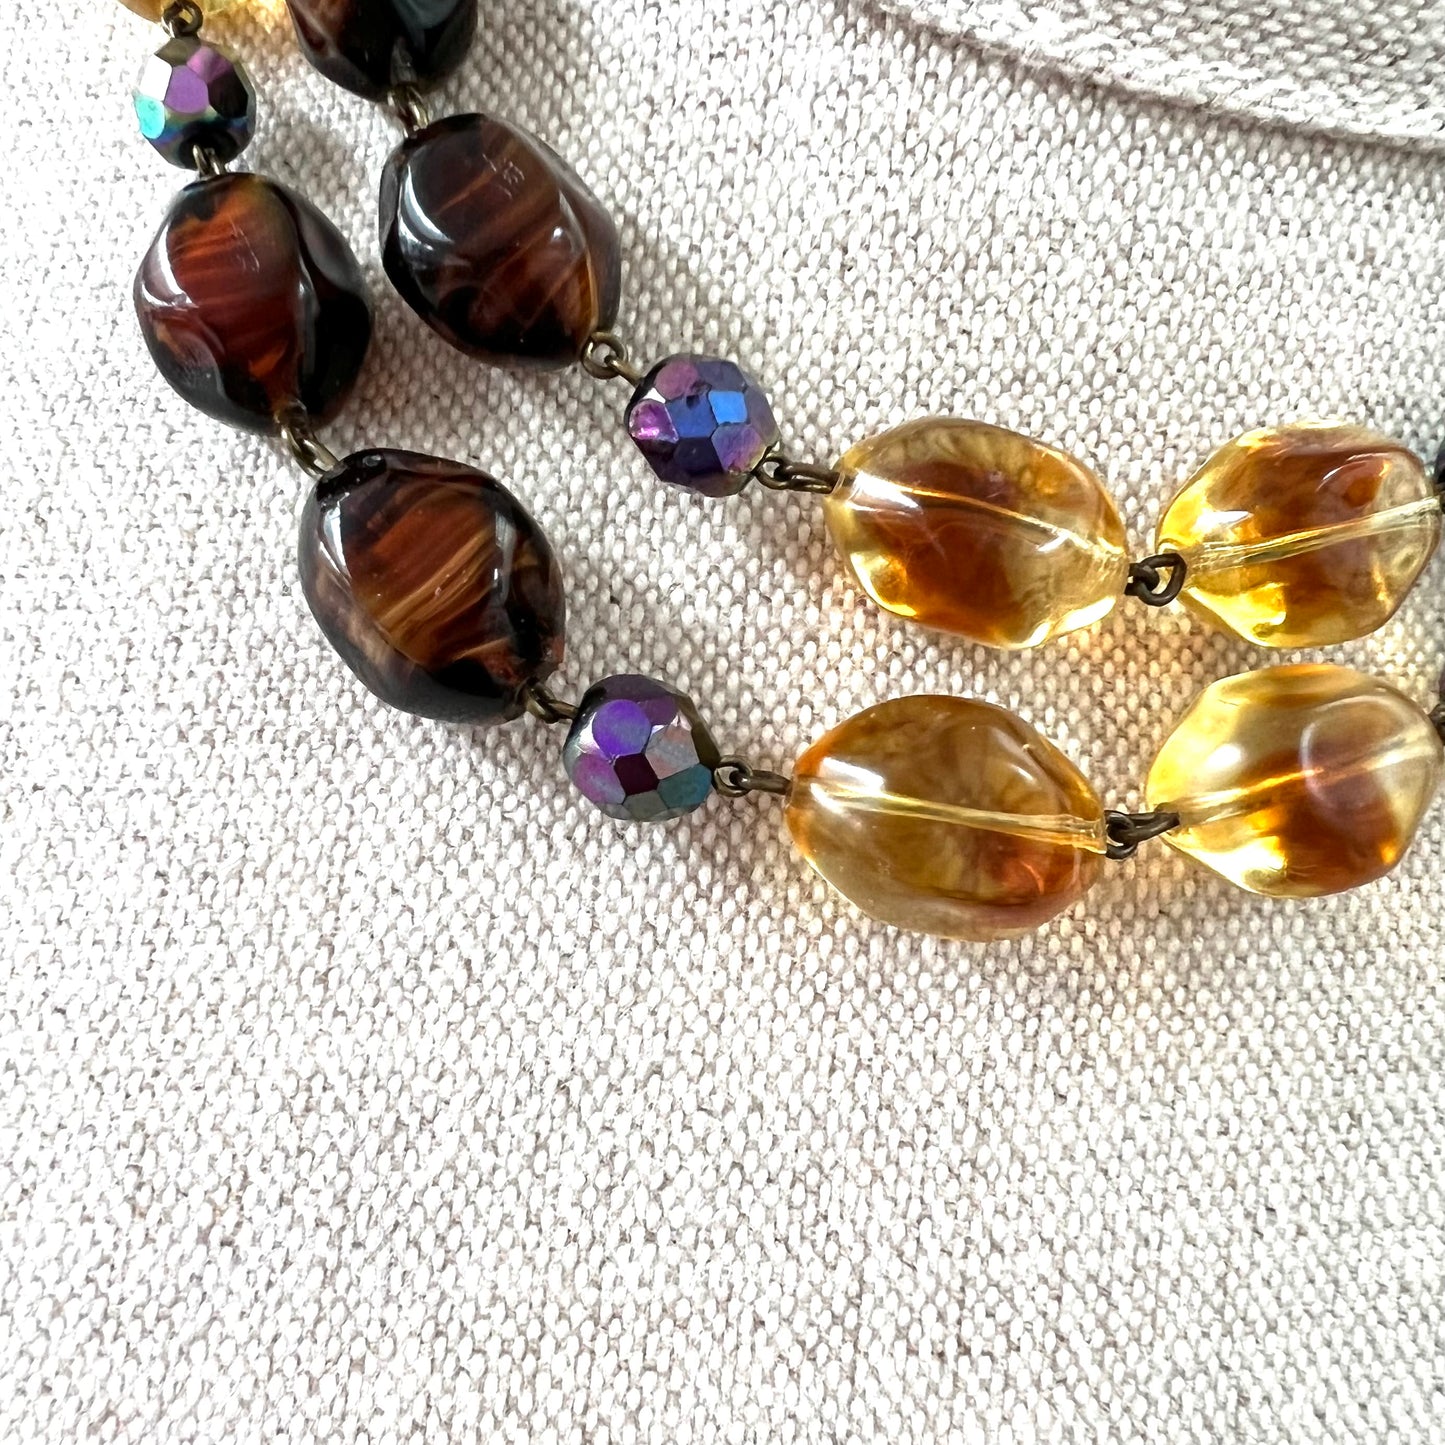 Heavy Molded Banded Agate Glass, Citrine Glass and Black Faceted Glass Two Strand Beaded Necklace